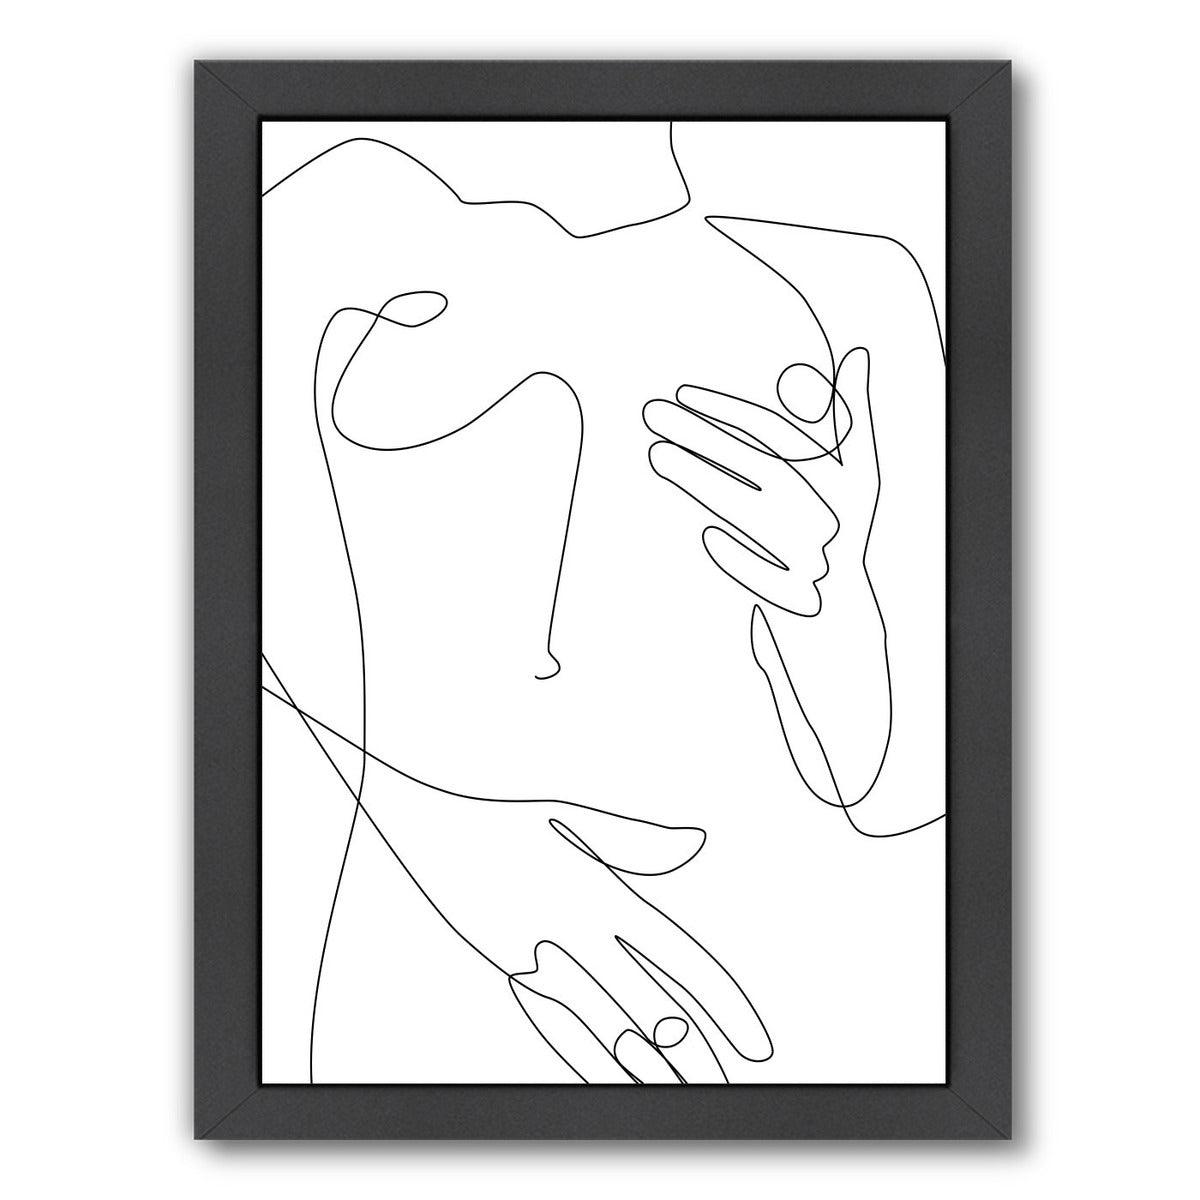 Sensual Erotic by Explicit Design Framed Print - Americanflat